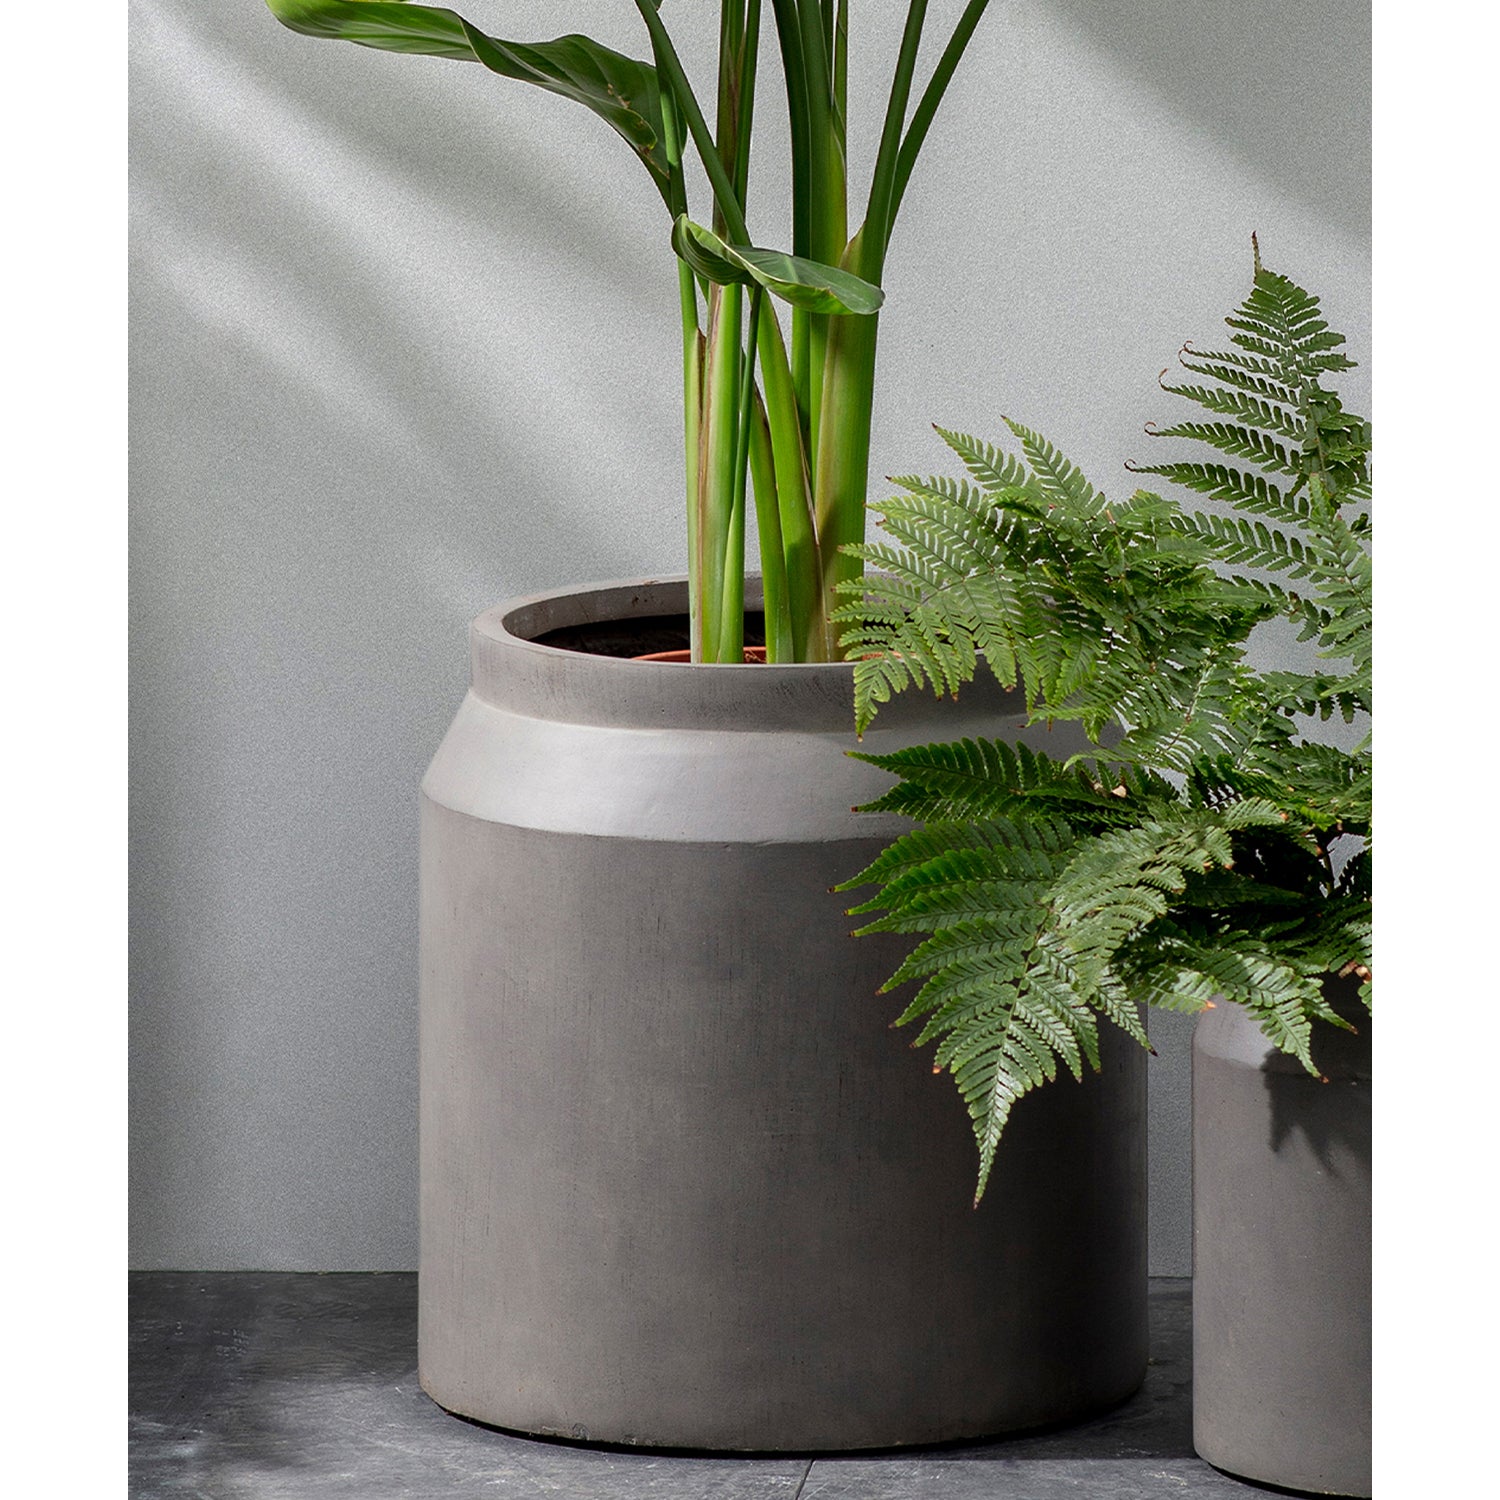 Set of 2 Draycott Planters Pebble Fibre Clay by Garden Trading